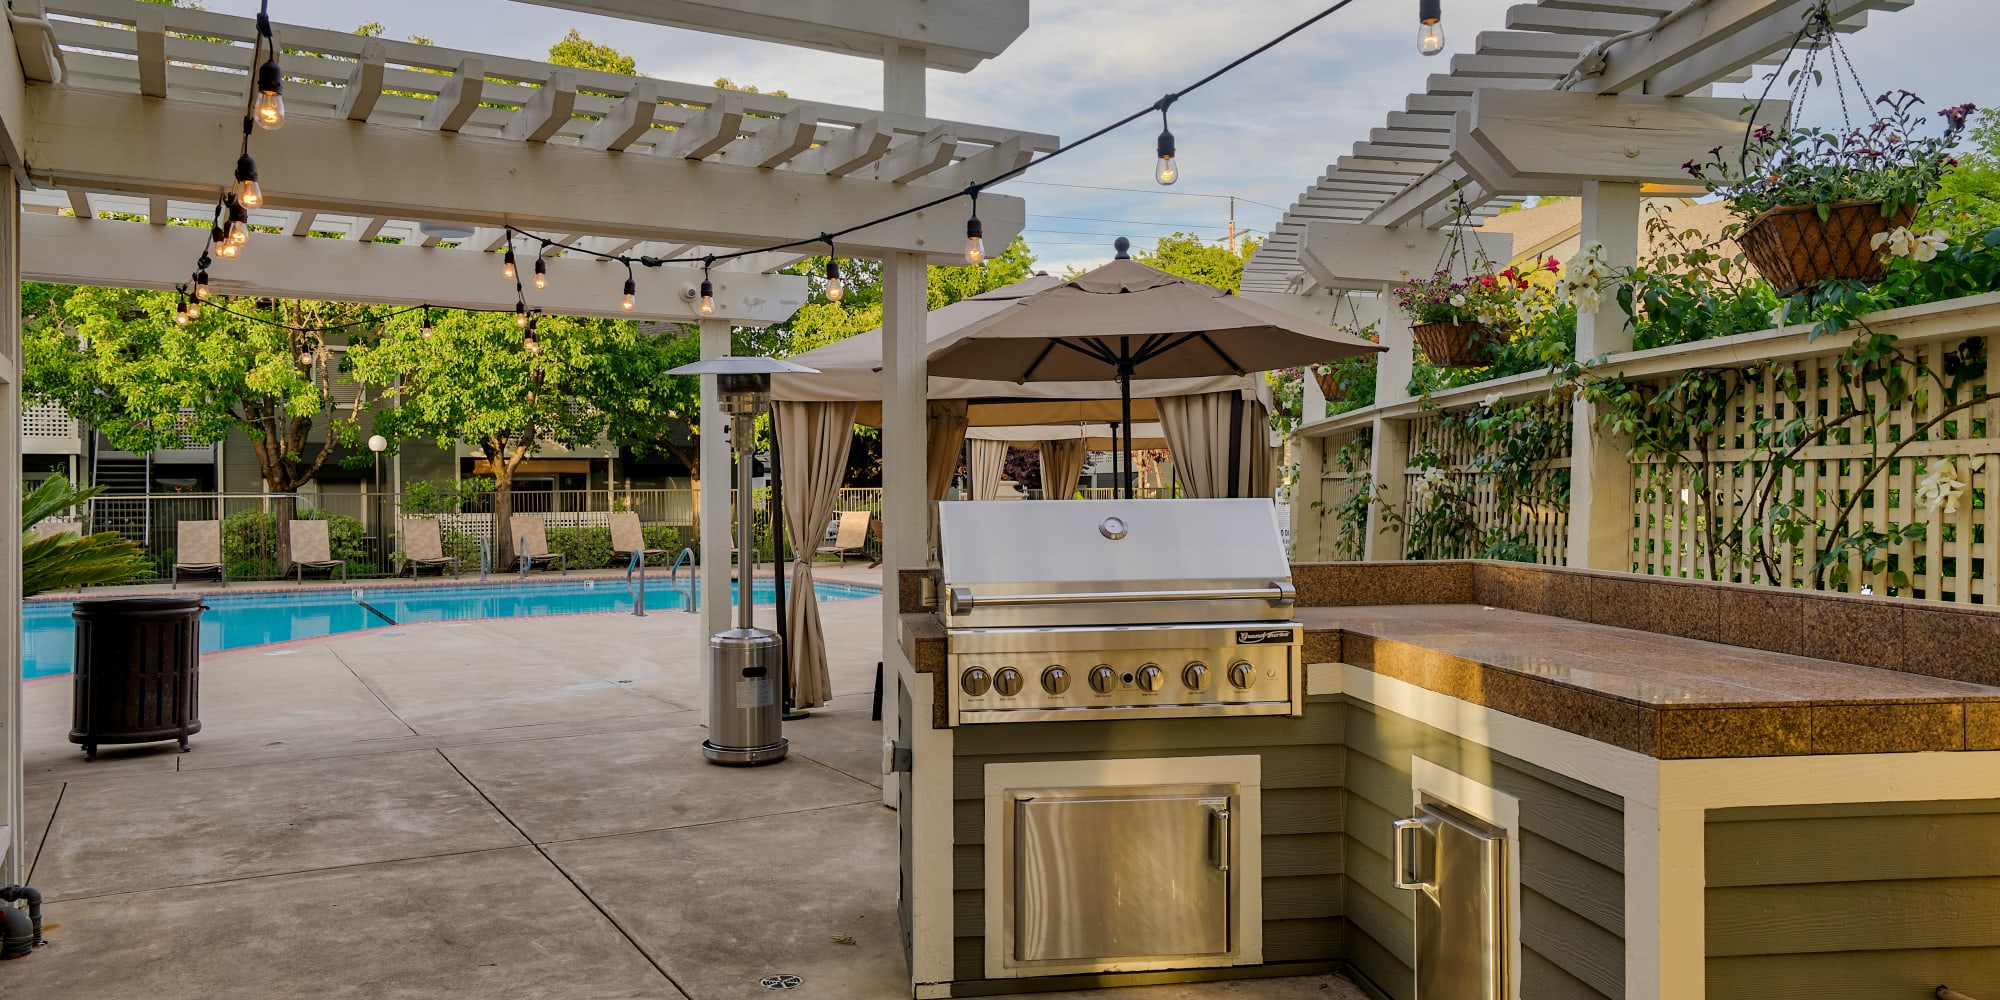 grills outside at The Villages in Santa Rosa, California